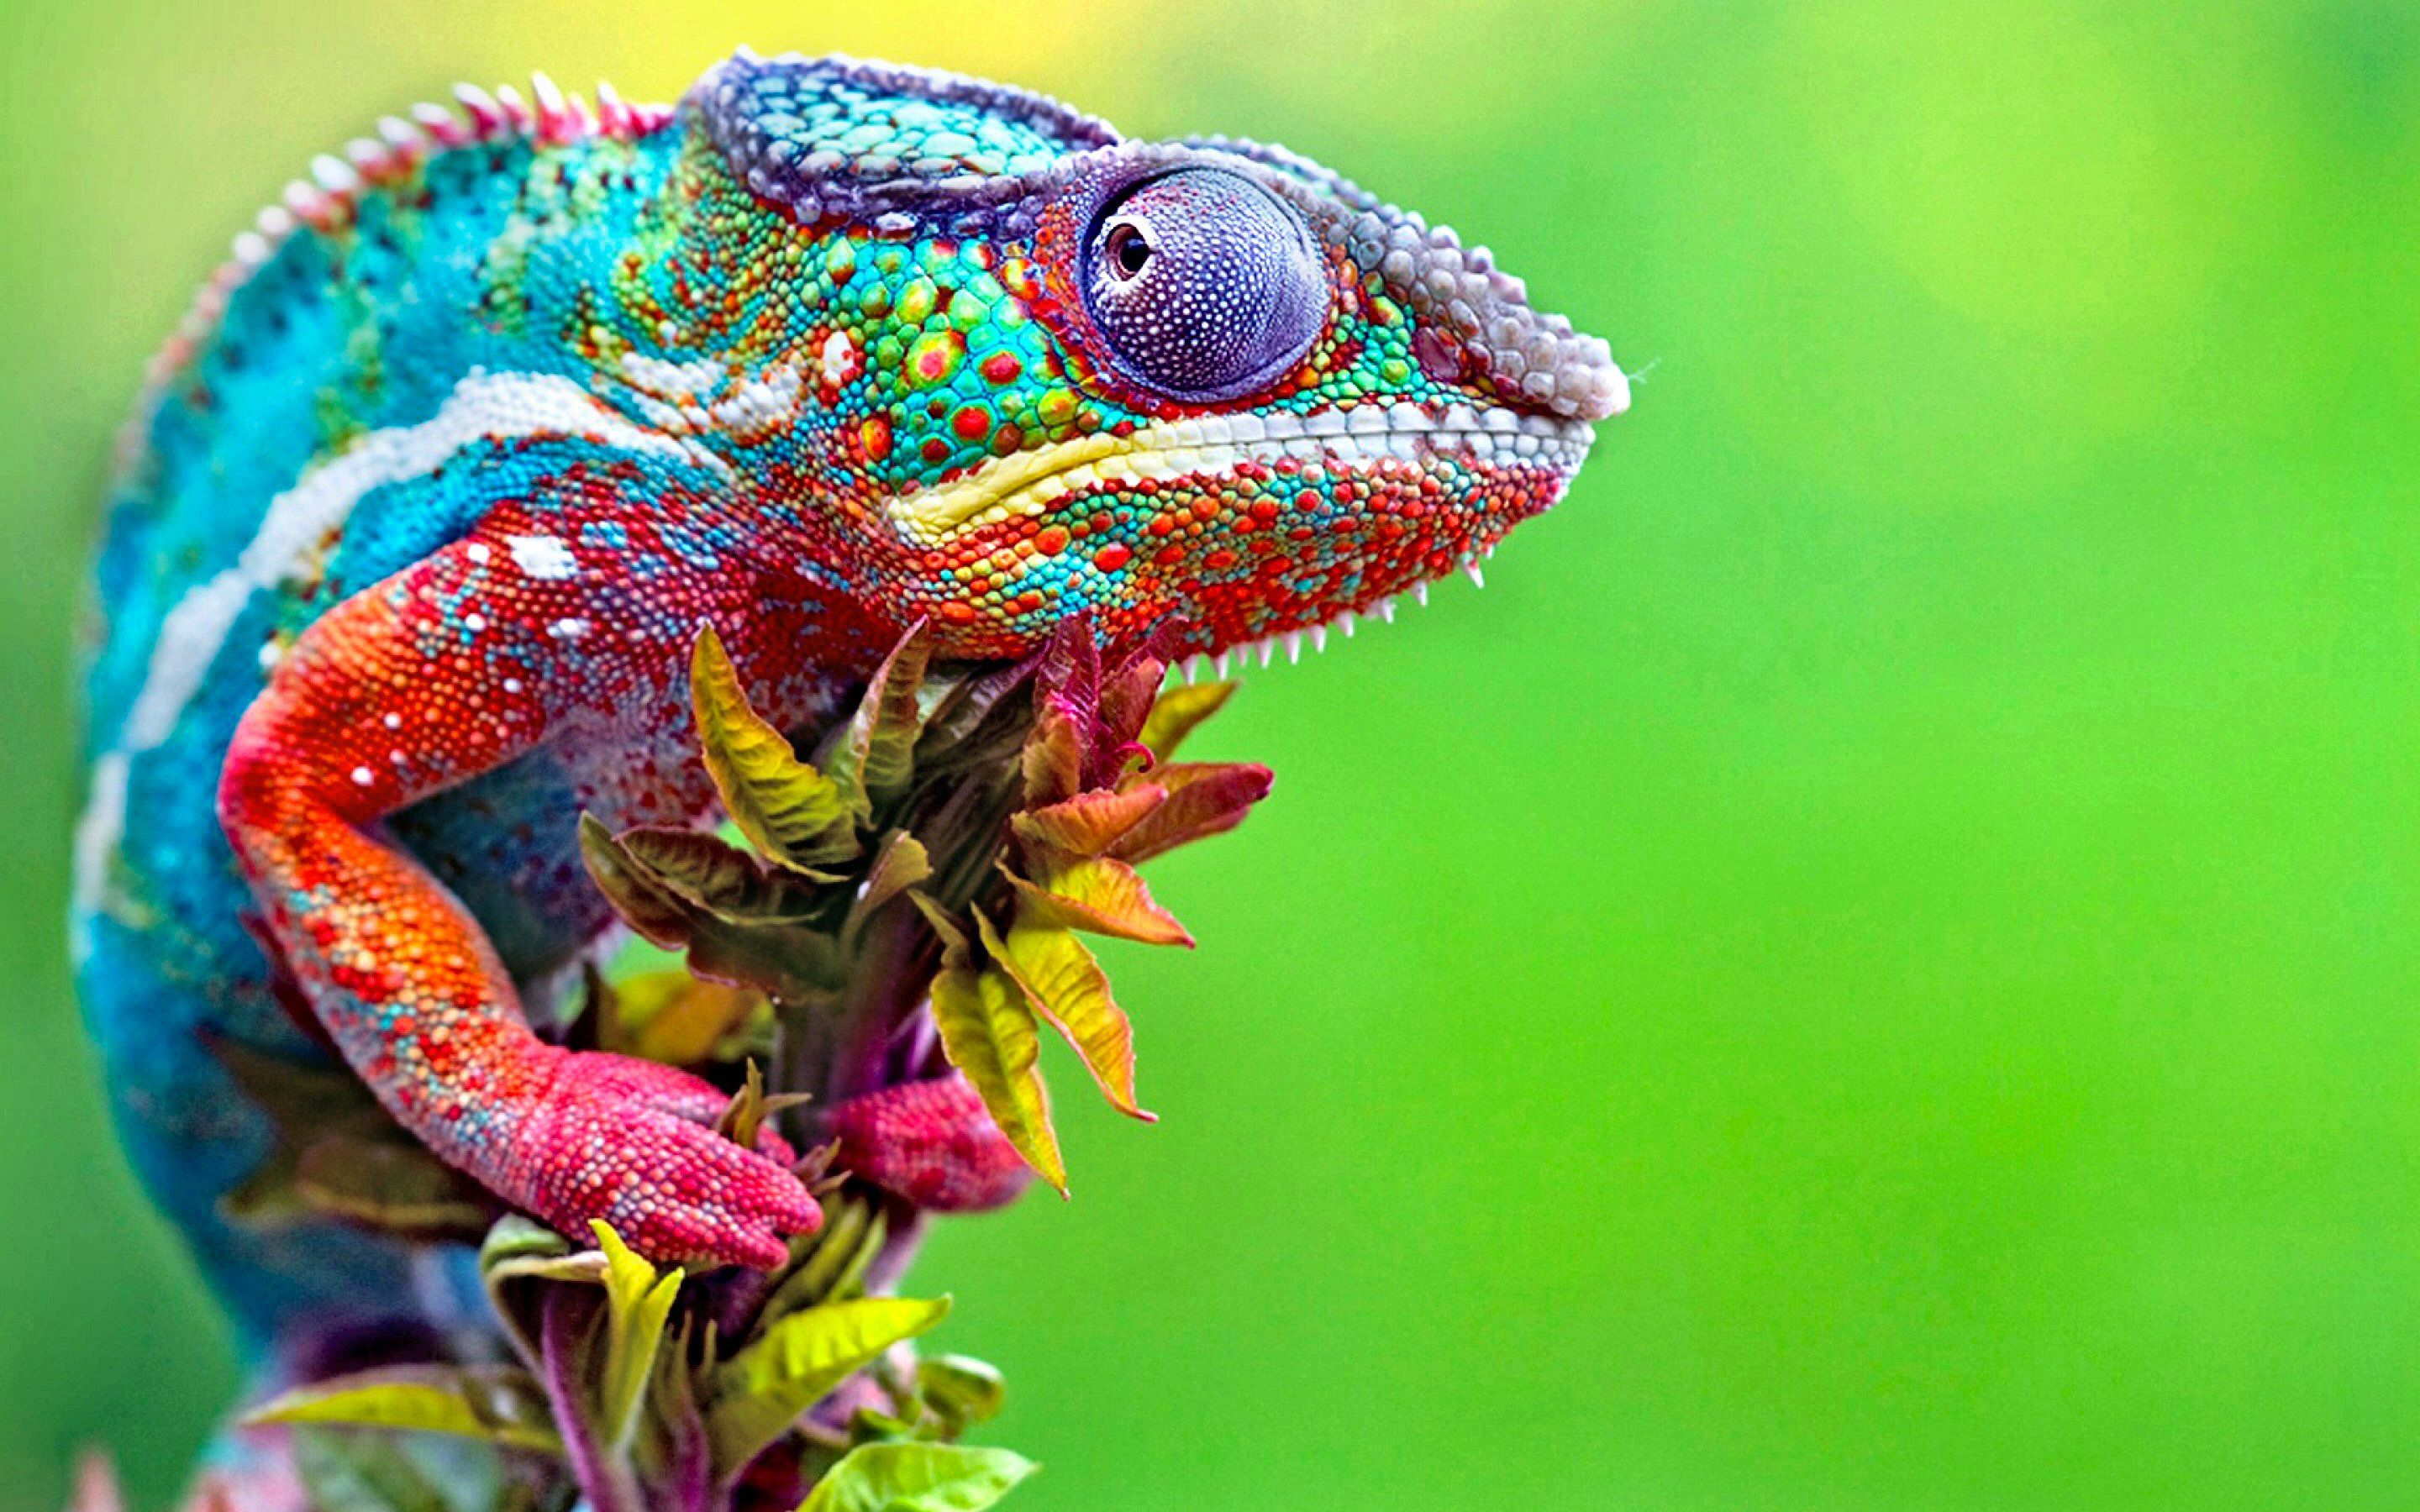 Spectral Confusion - ANIMAL [01] colorful panther chameleon ...